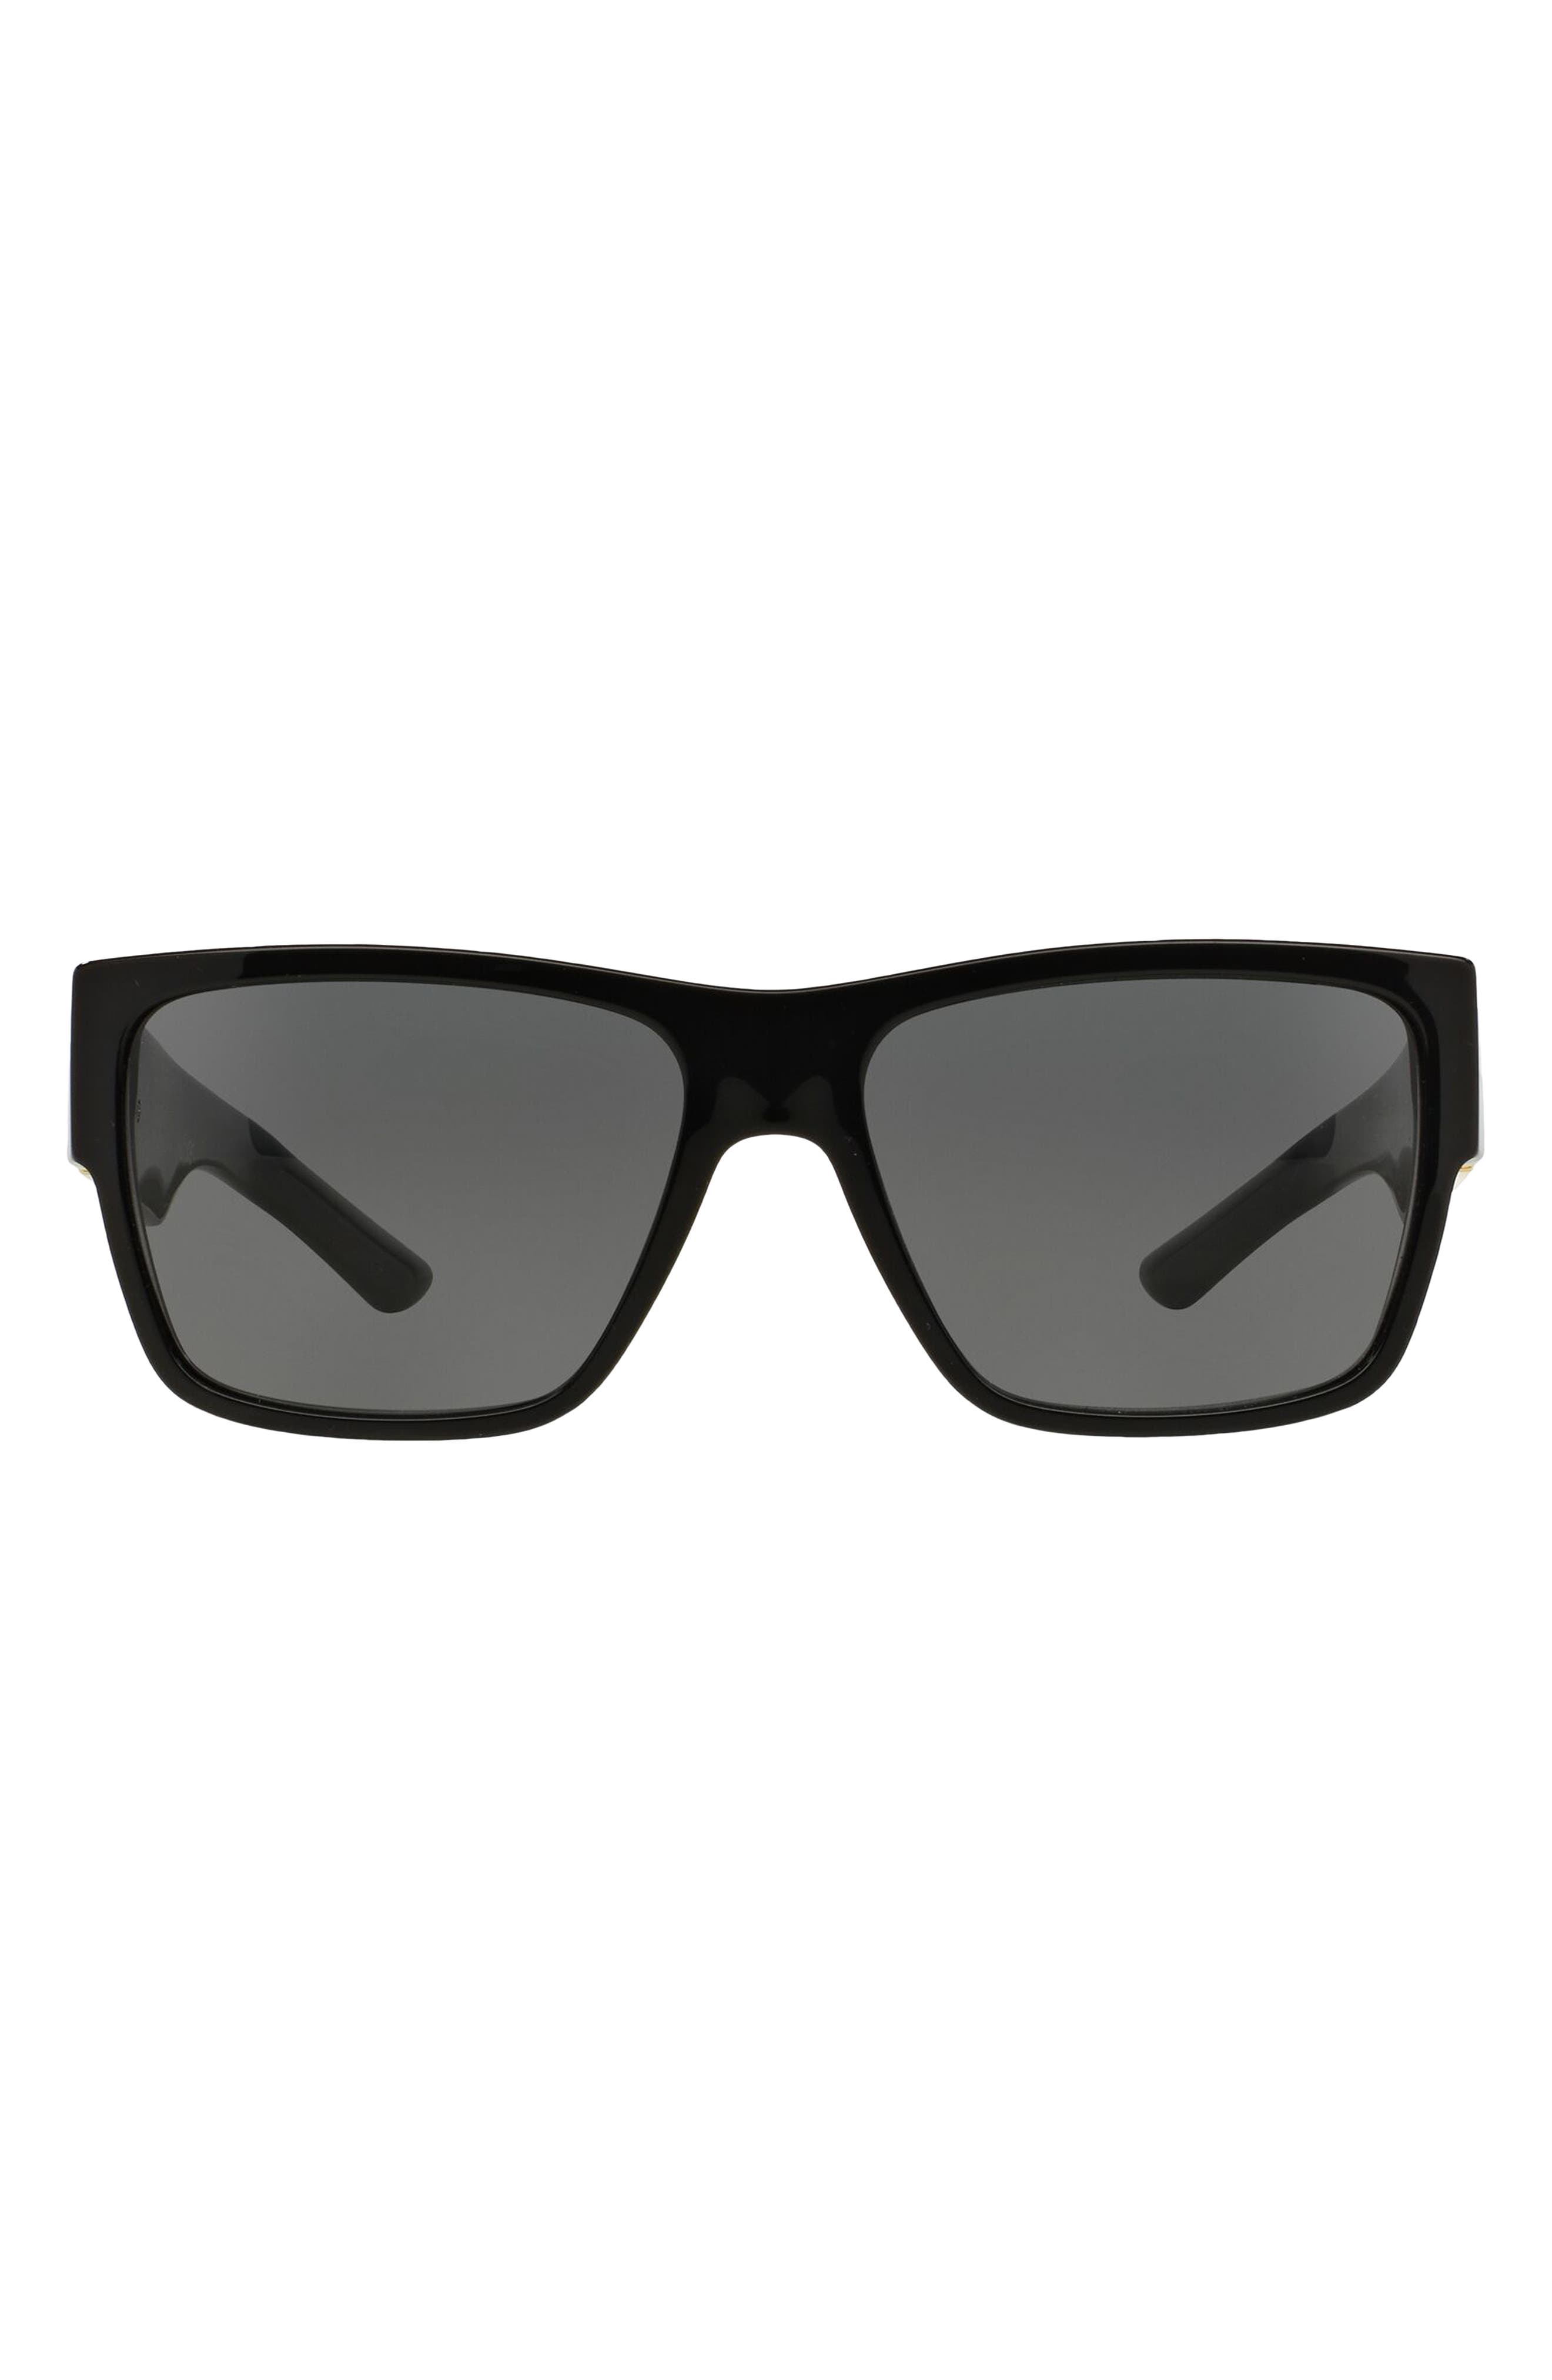 Versace 59mm Square Sunglasses in Black/Grey Solid at Nordstrom